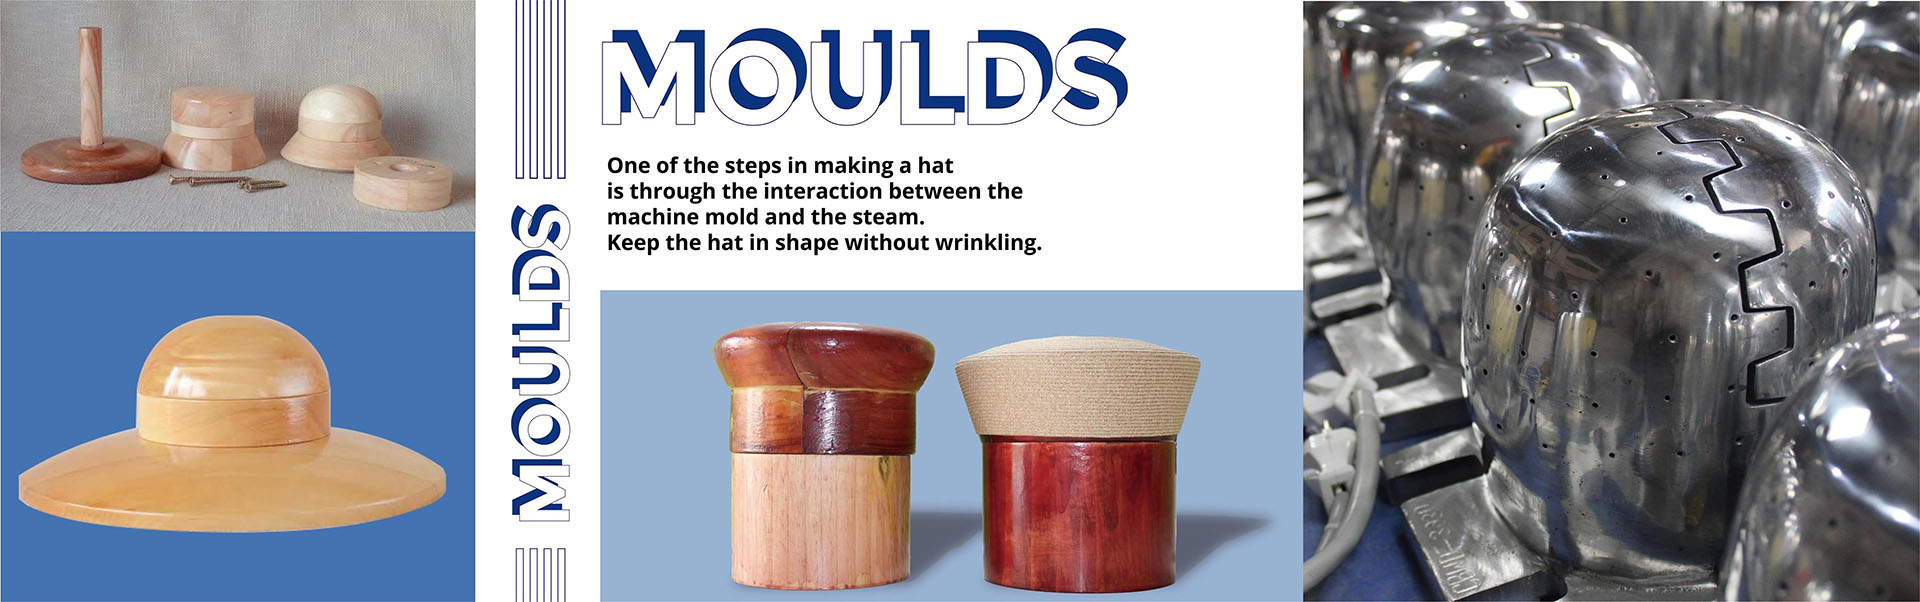 Mould for caps